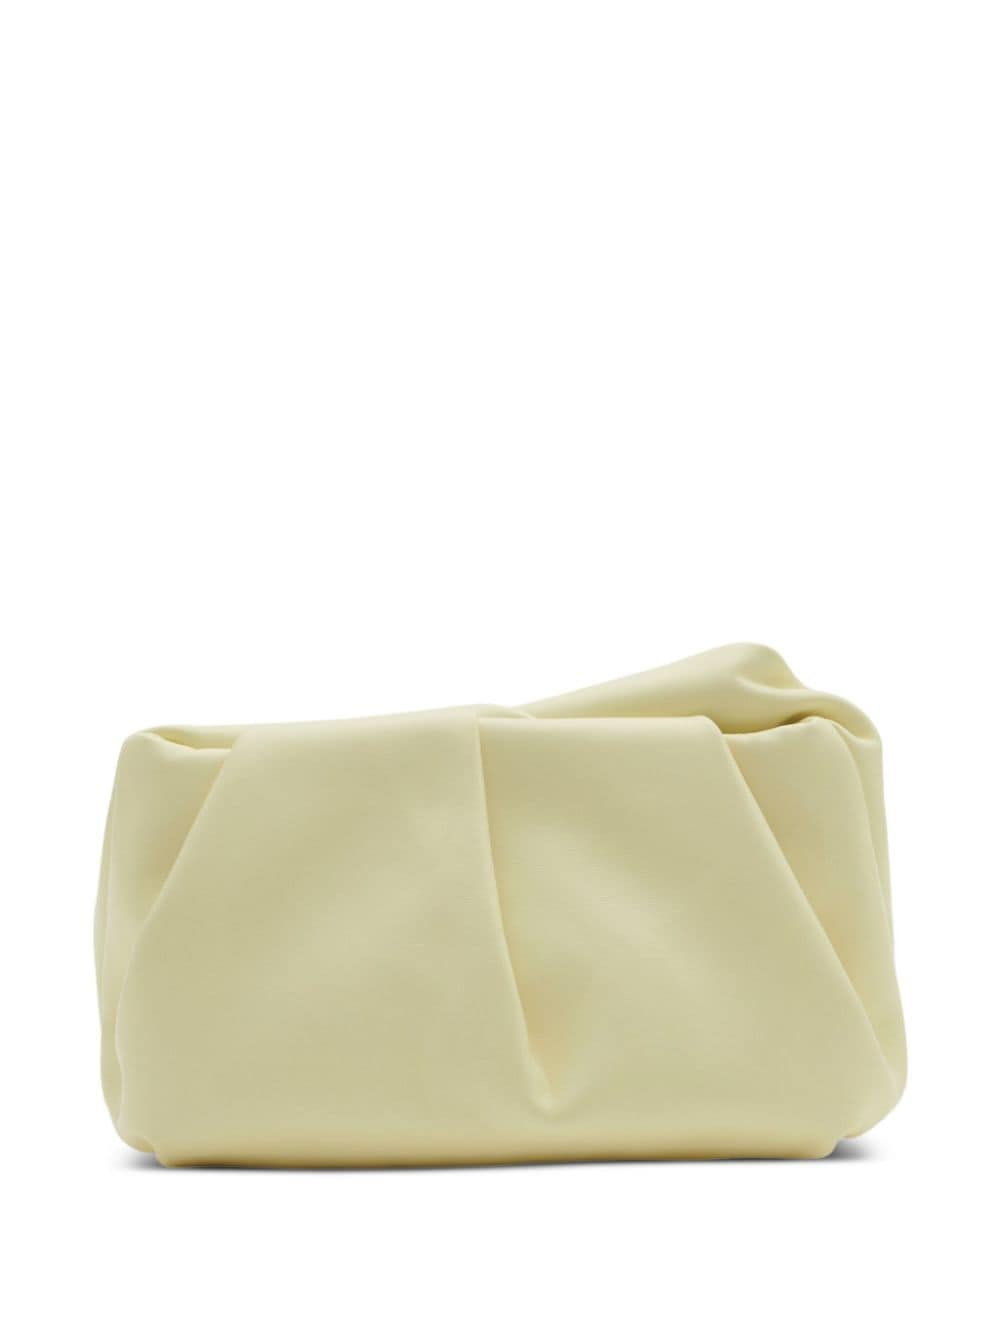 Burberry Rose leather clutch bag - Beige